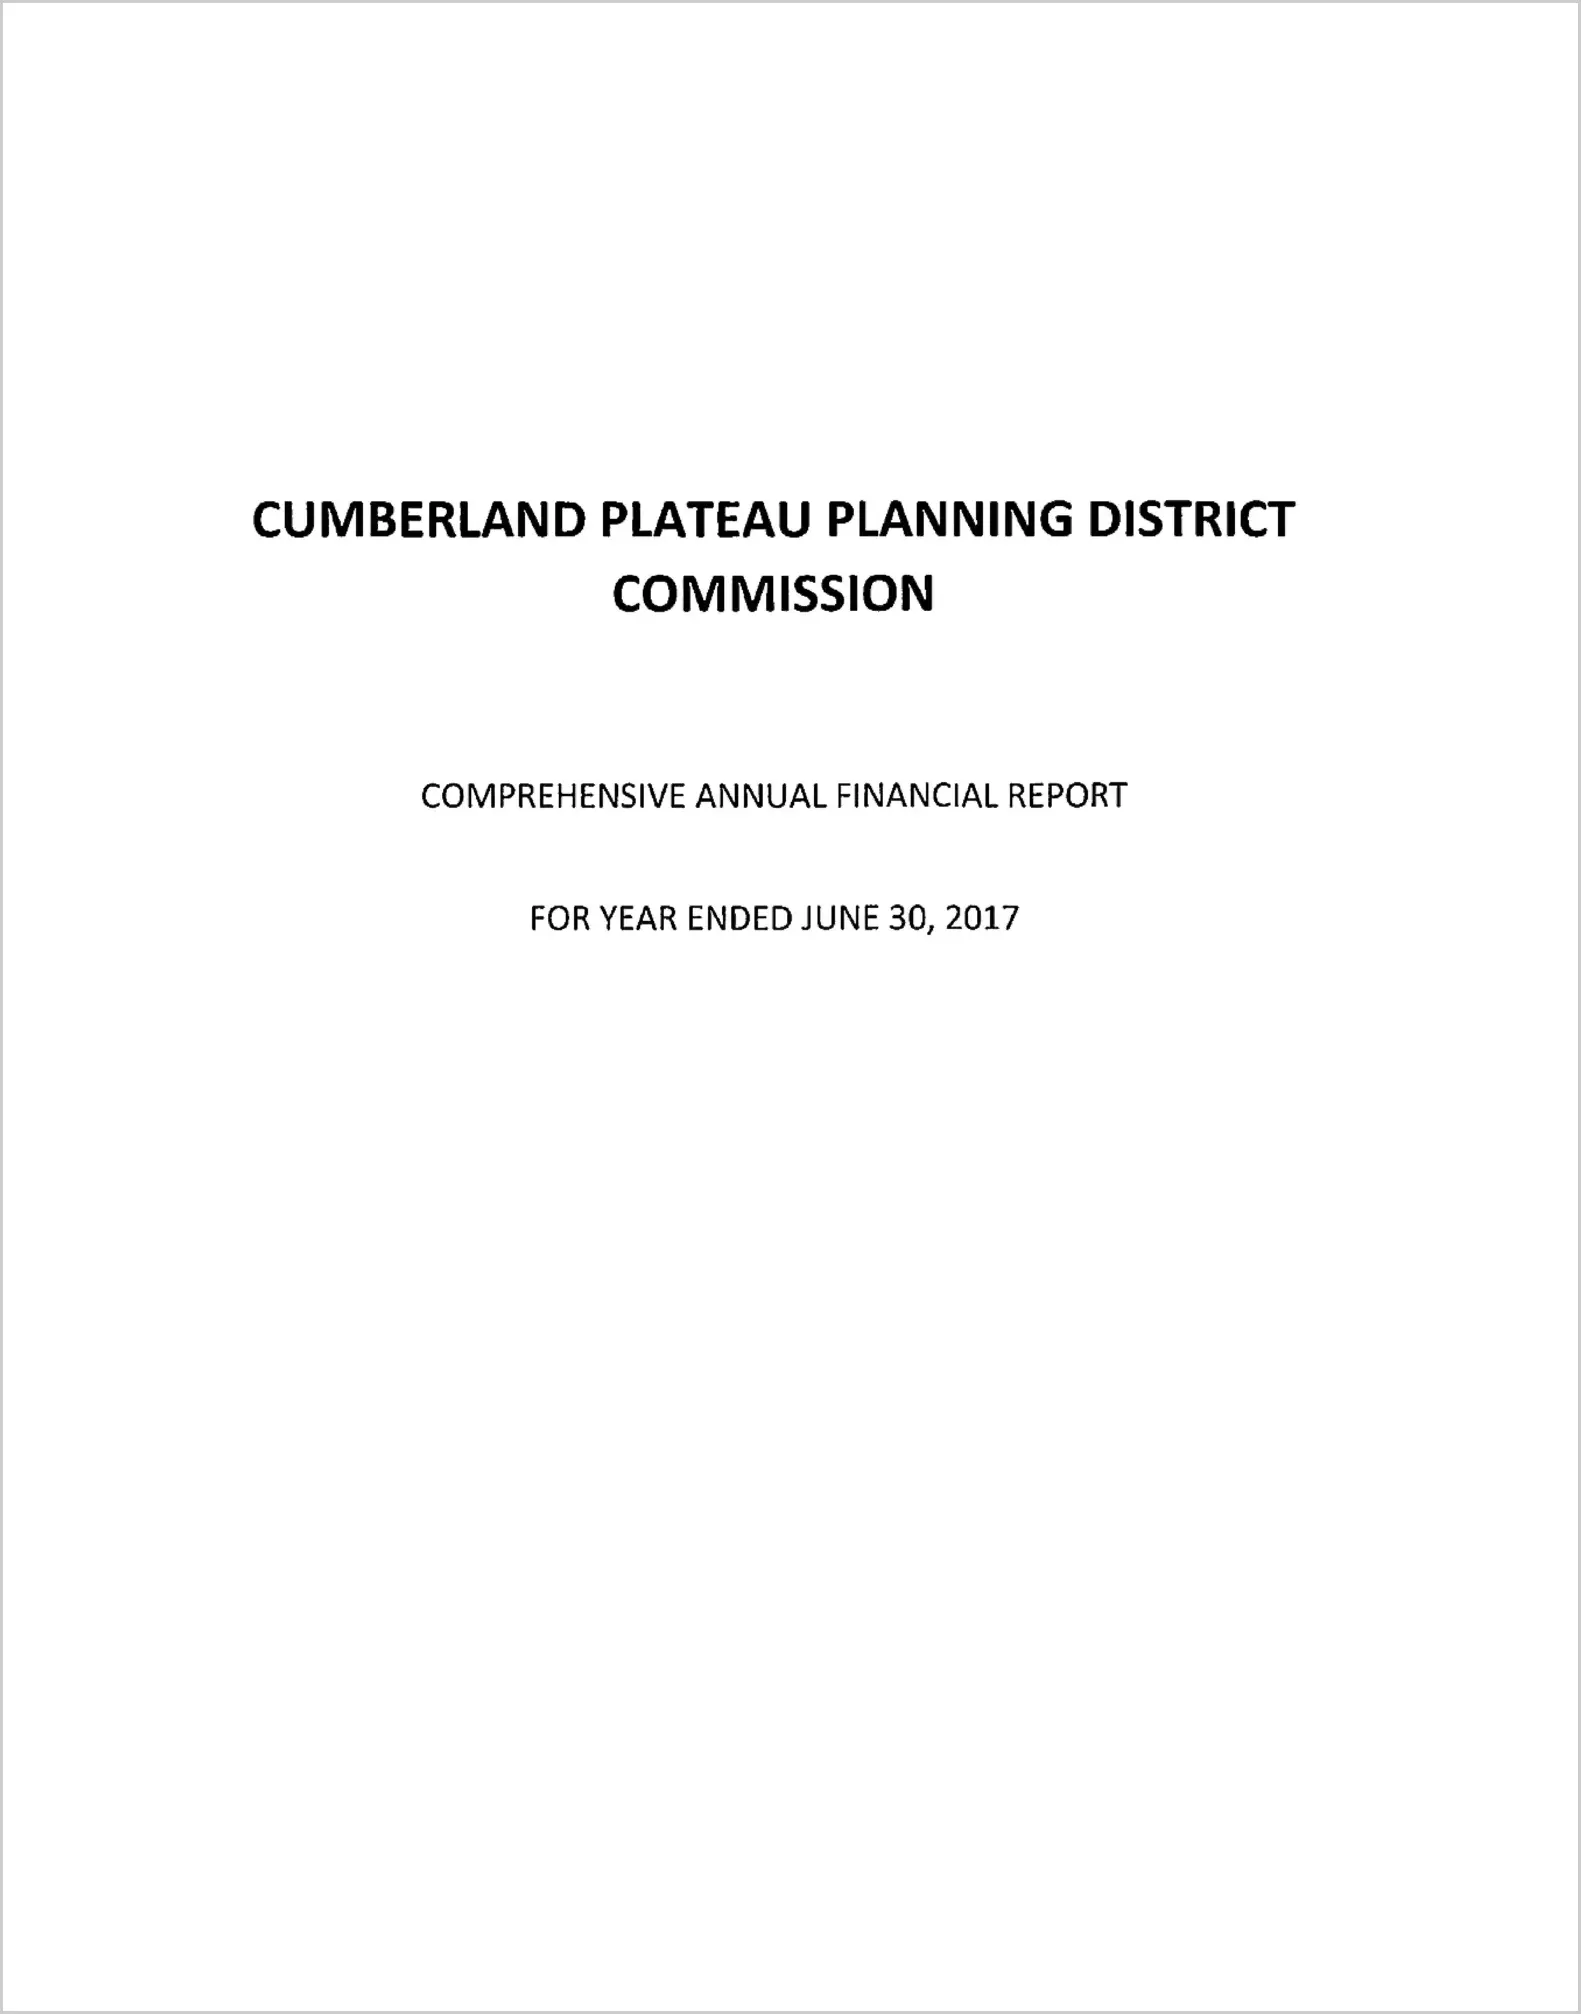 2017 ABC/Other Annual Financial Report  for Cumberland Plateau Planning District Commission